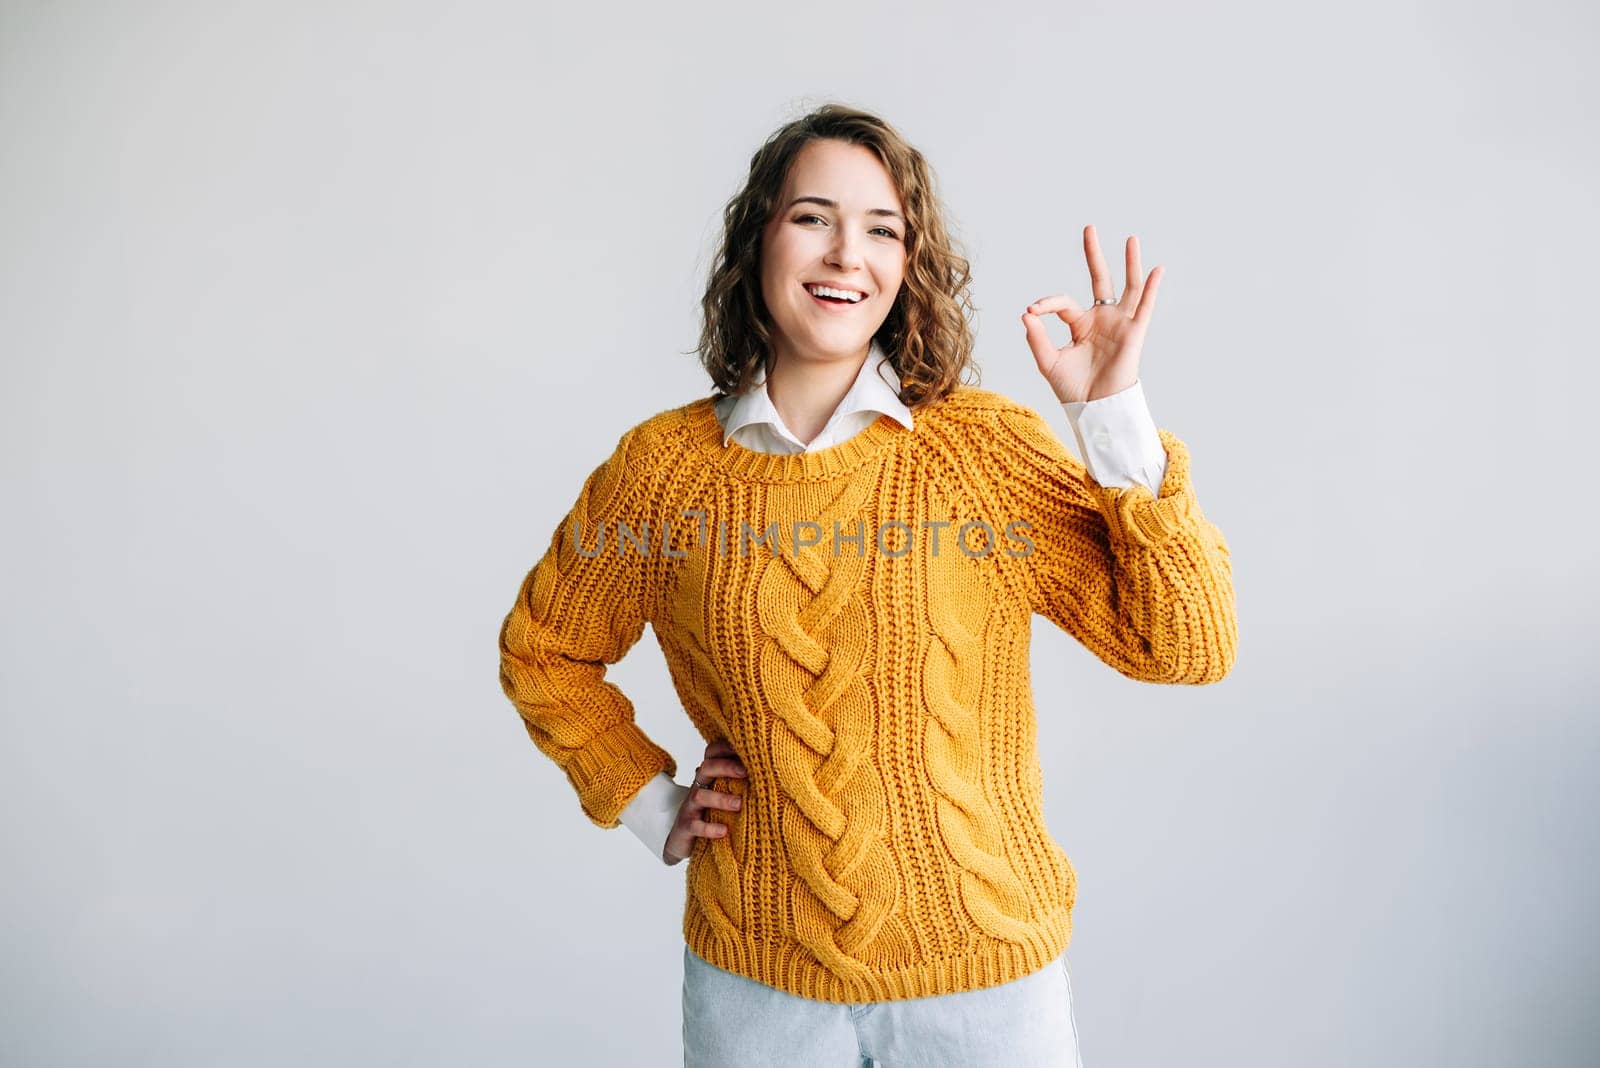 Confident Woman Gesturing OK. Smiling Lady Recommends Product with Hand Sign - Advertising Concept - Isolated on White Background - Positive Gesture for Promotion or Service Endorsement